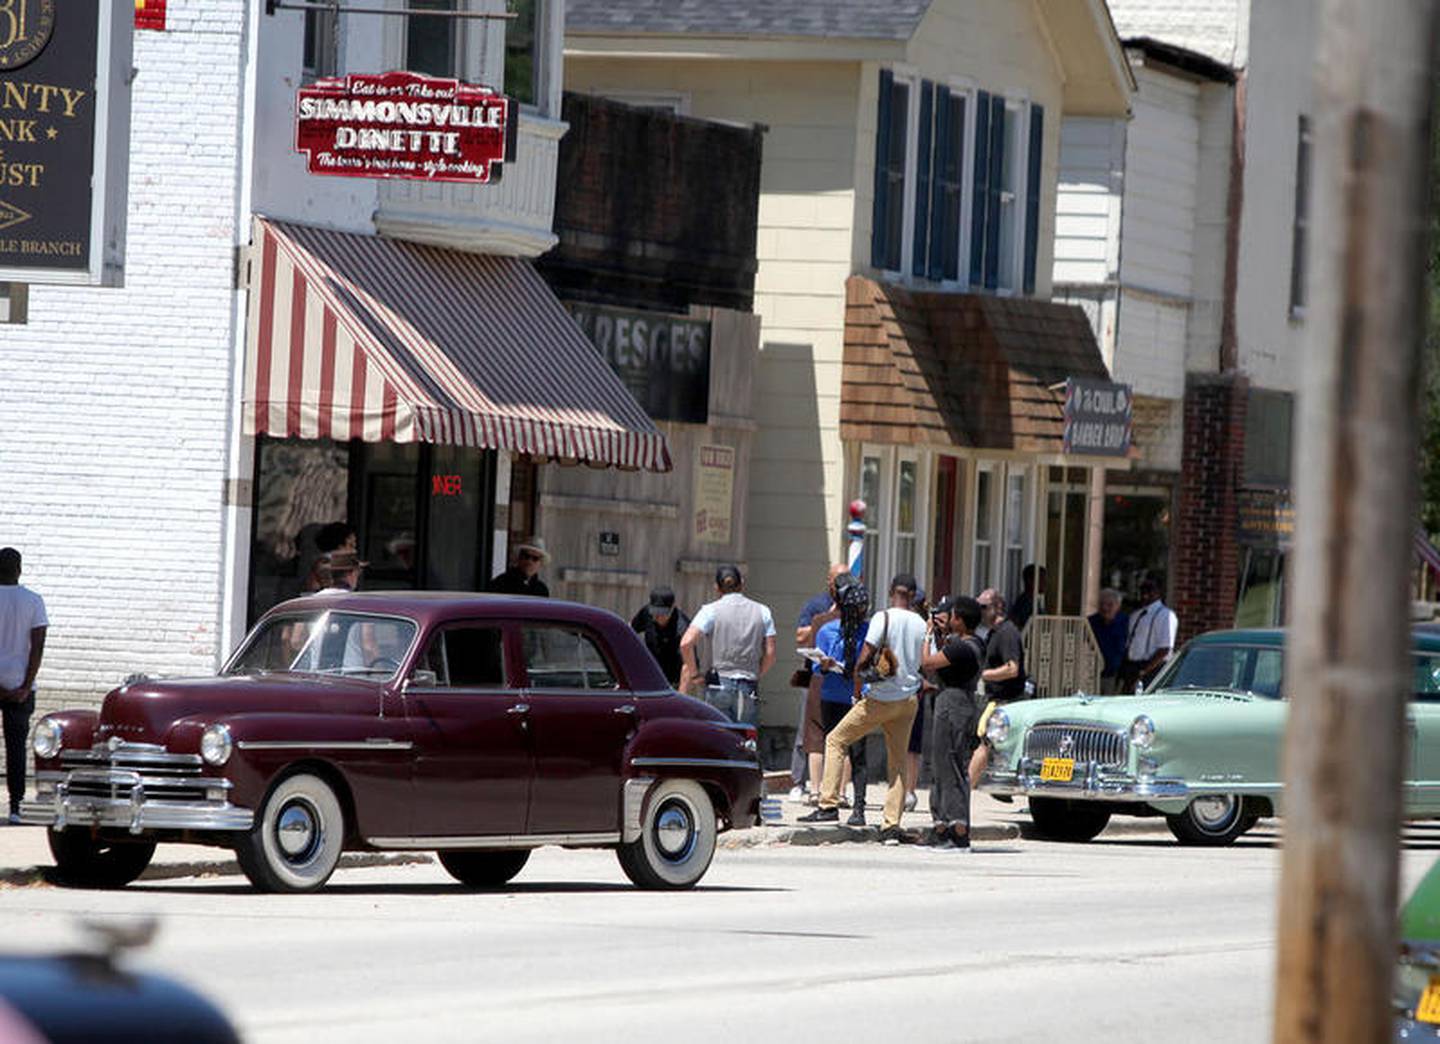 Filming of "Lovecraft Country" for HBO on Main Street in downtown Elburn began on July 25, 2018.